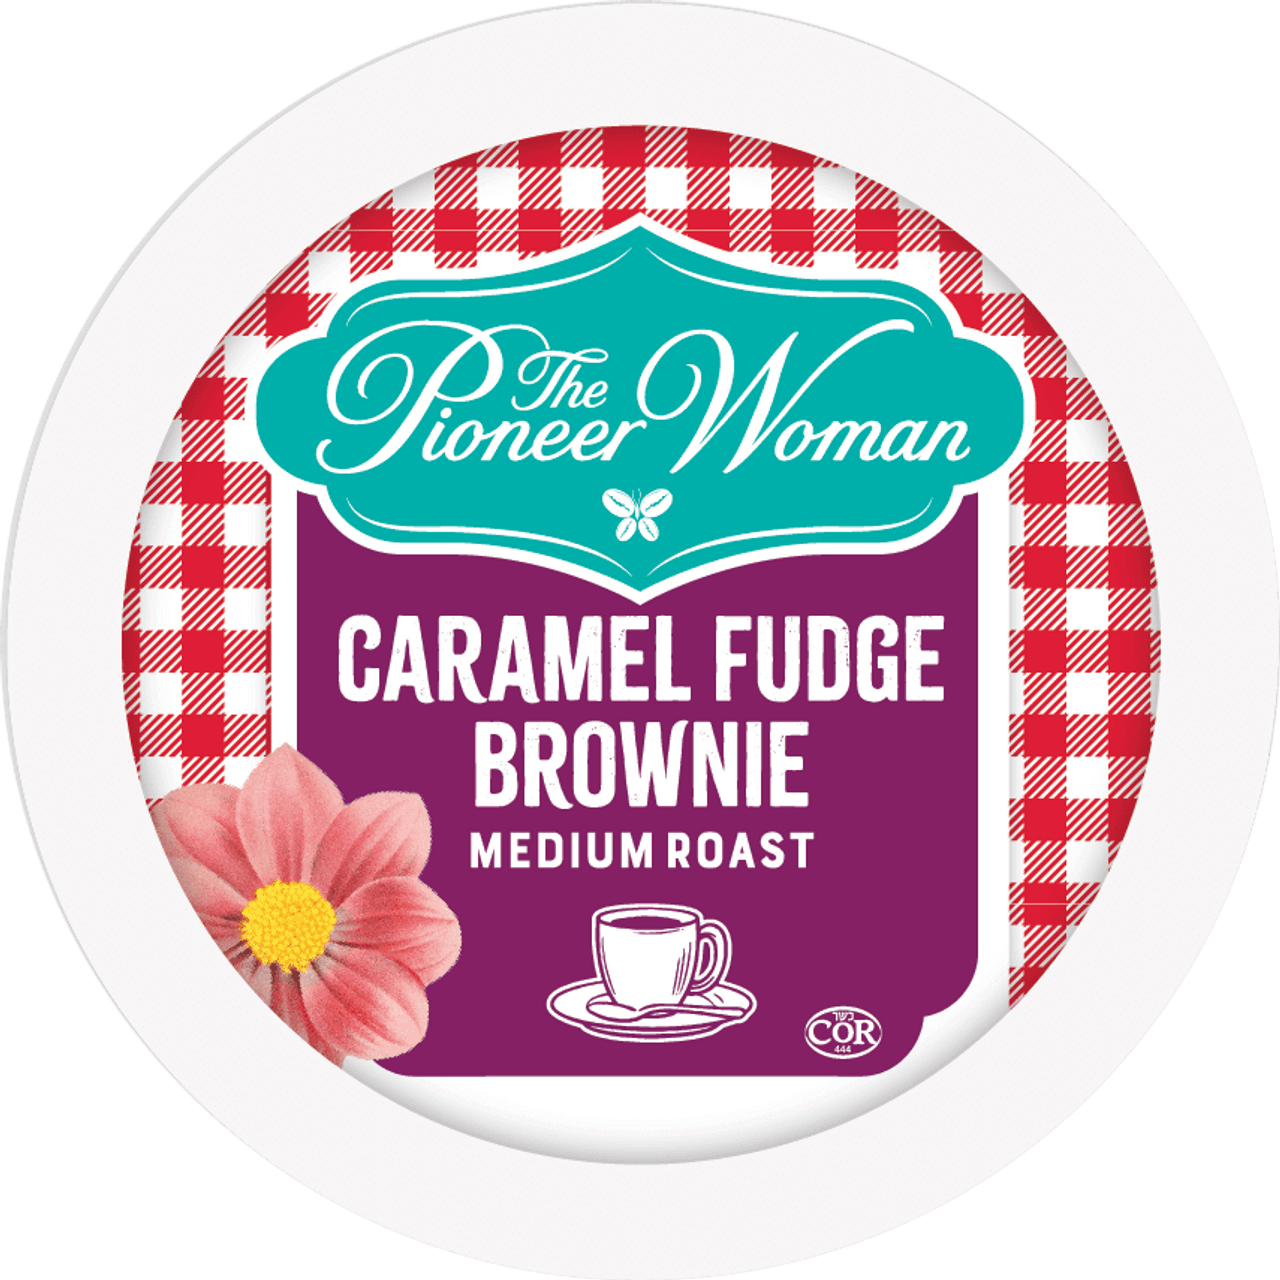 https://cdn11.bigcommerce.com/s-0s7s4kh/images/stencil/1280x1280/products/1589/8584/Caramel_Fudge_Brownie__25761__90769.1630252431.png?c=3